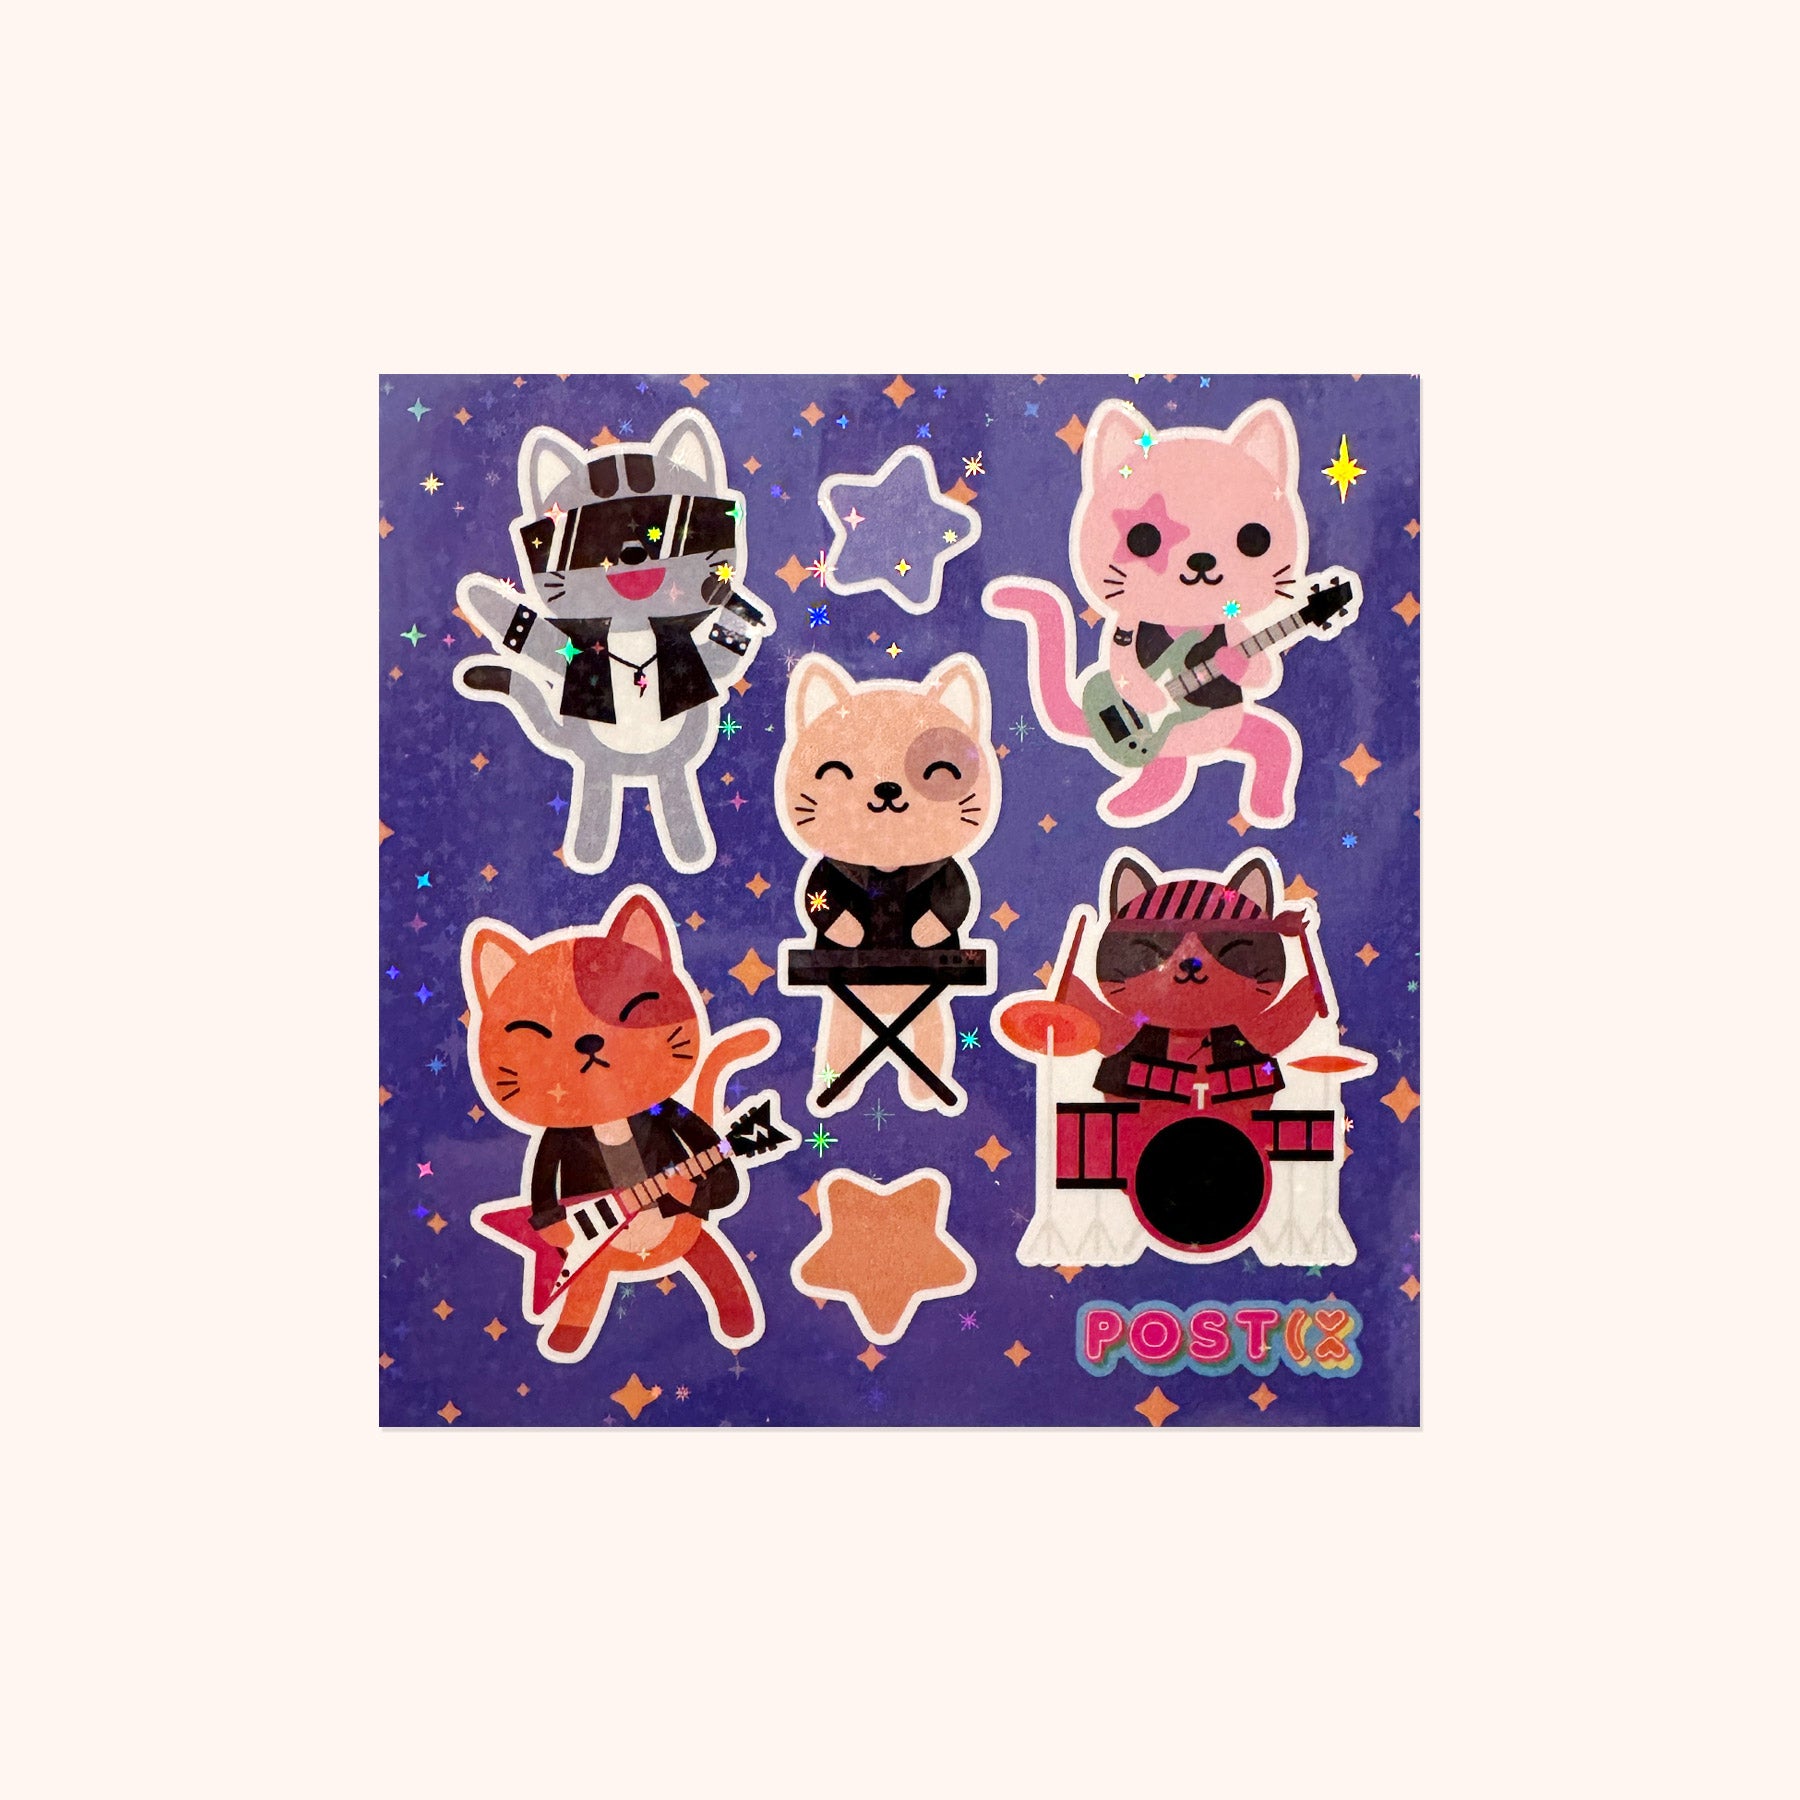 Cute Fighters Hologram Square Sticker Sheet